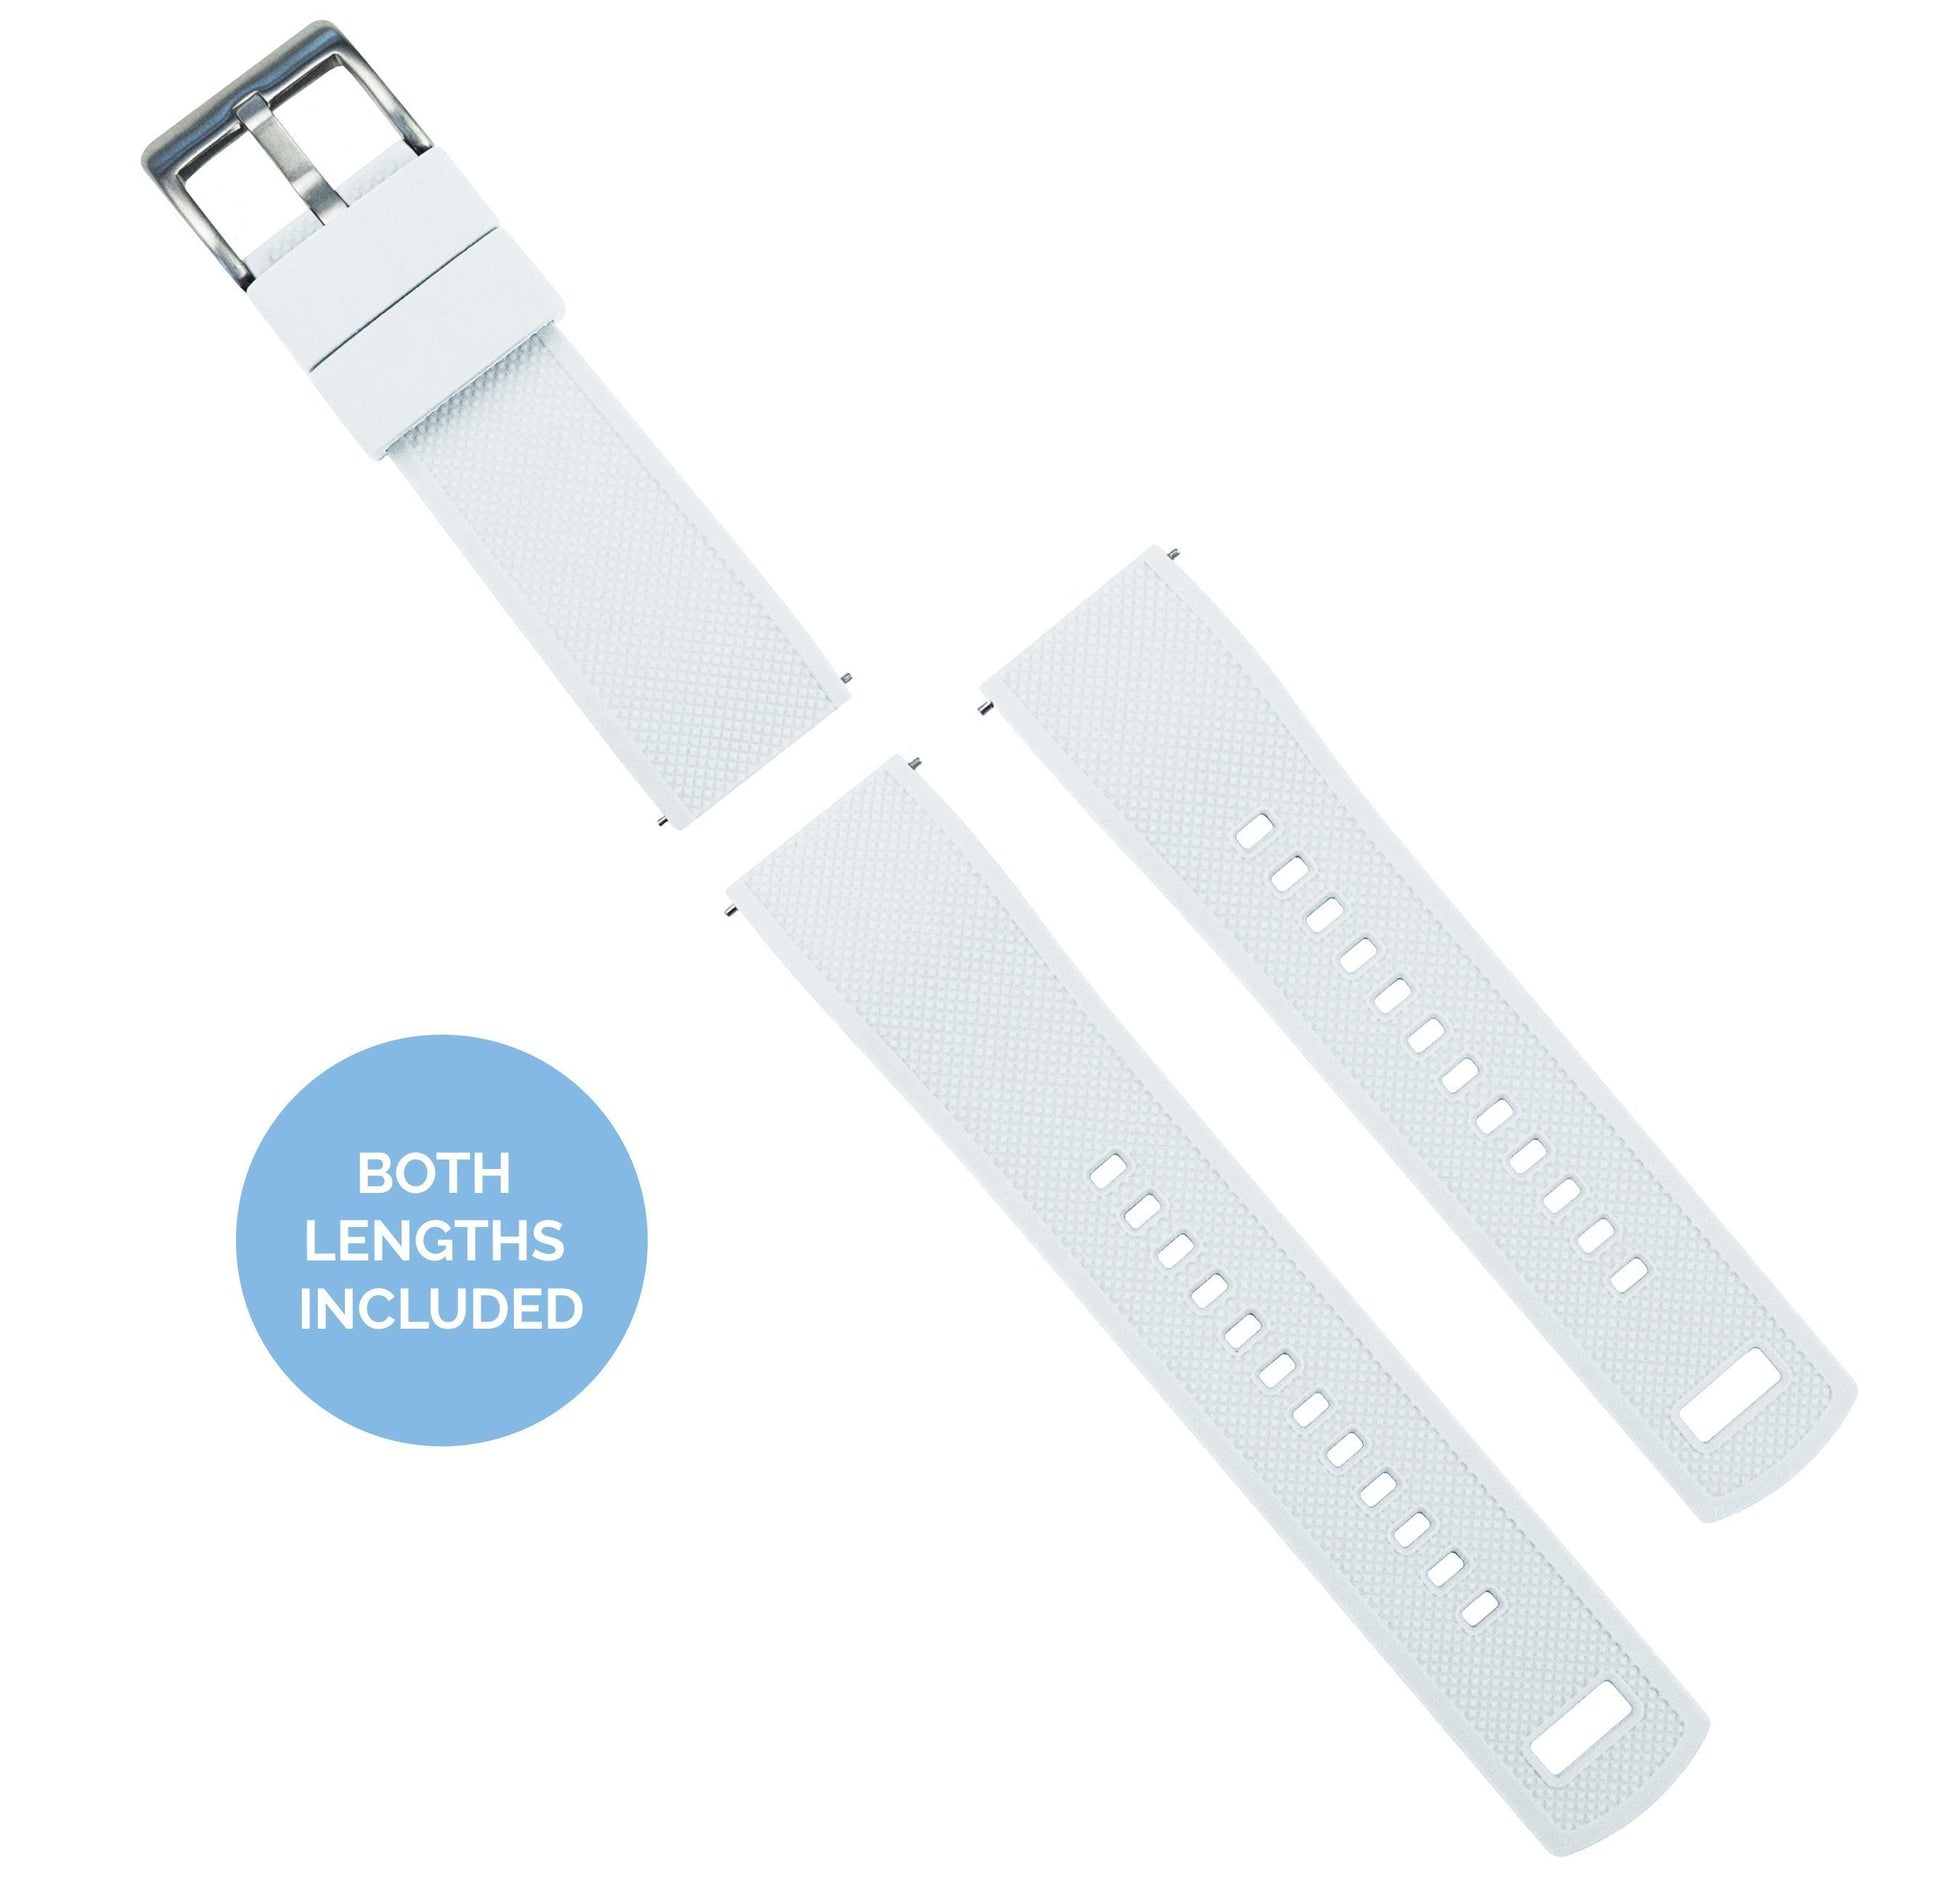 Withings Nokia Activité and Steel HR | Elite Silicone | White Top / Black Bottom - Barton Watch Bands